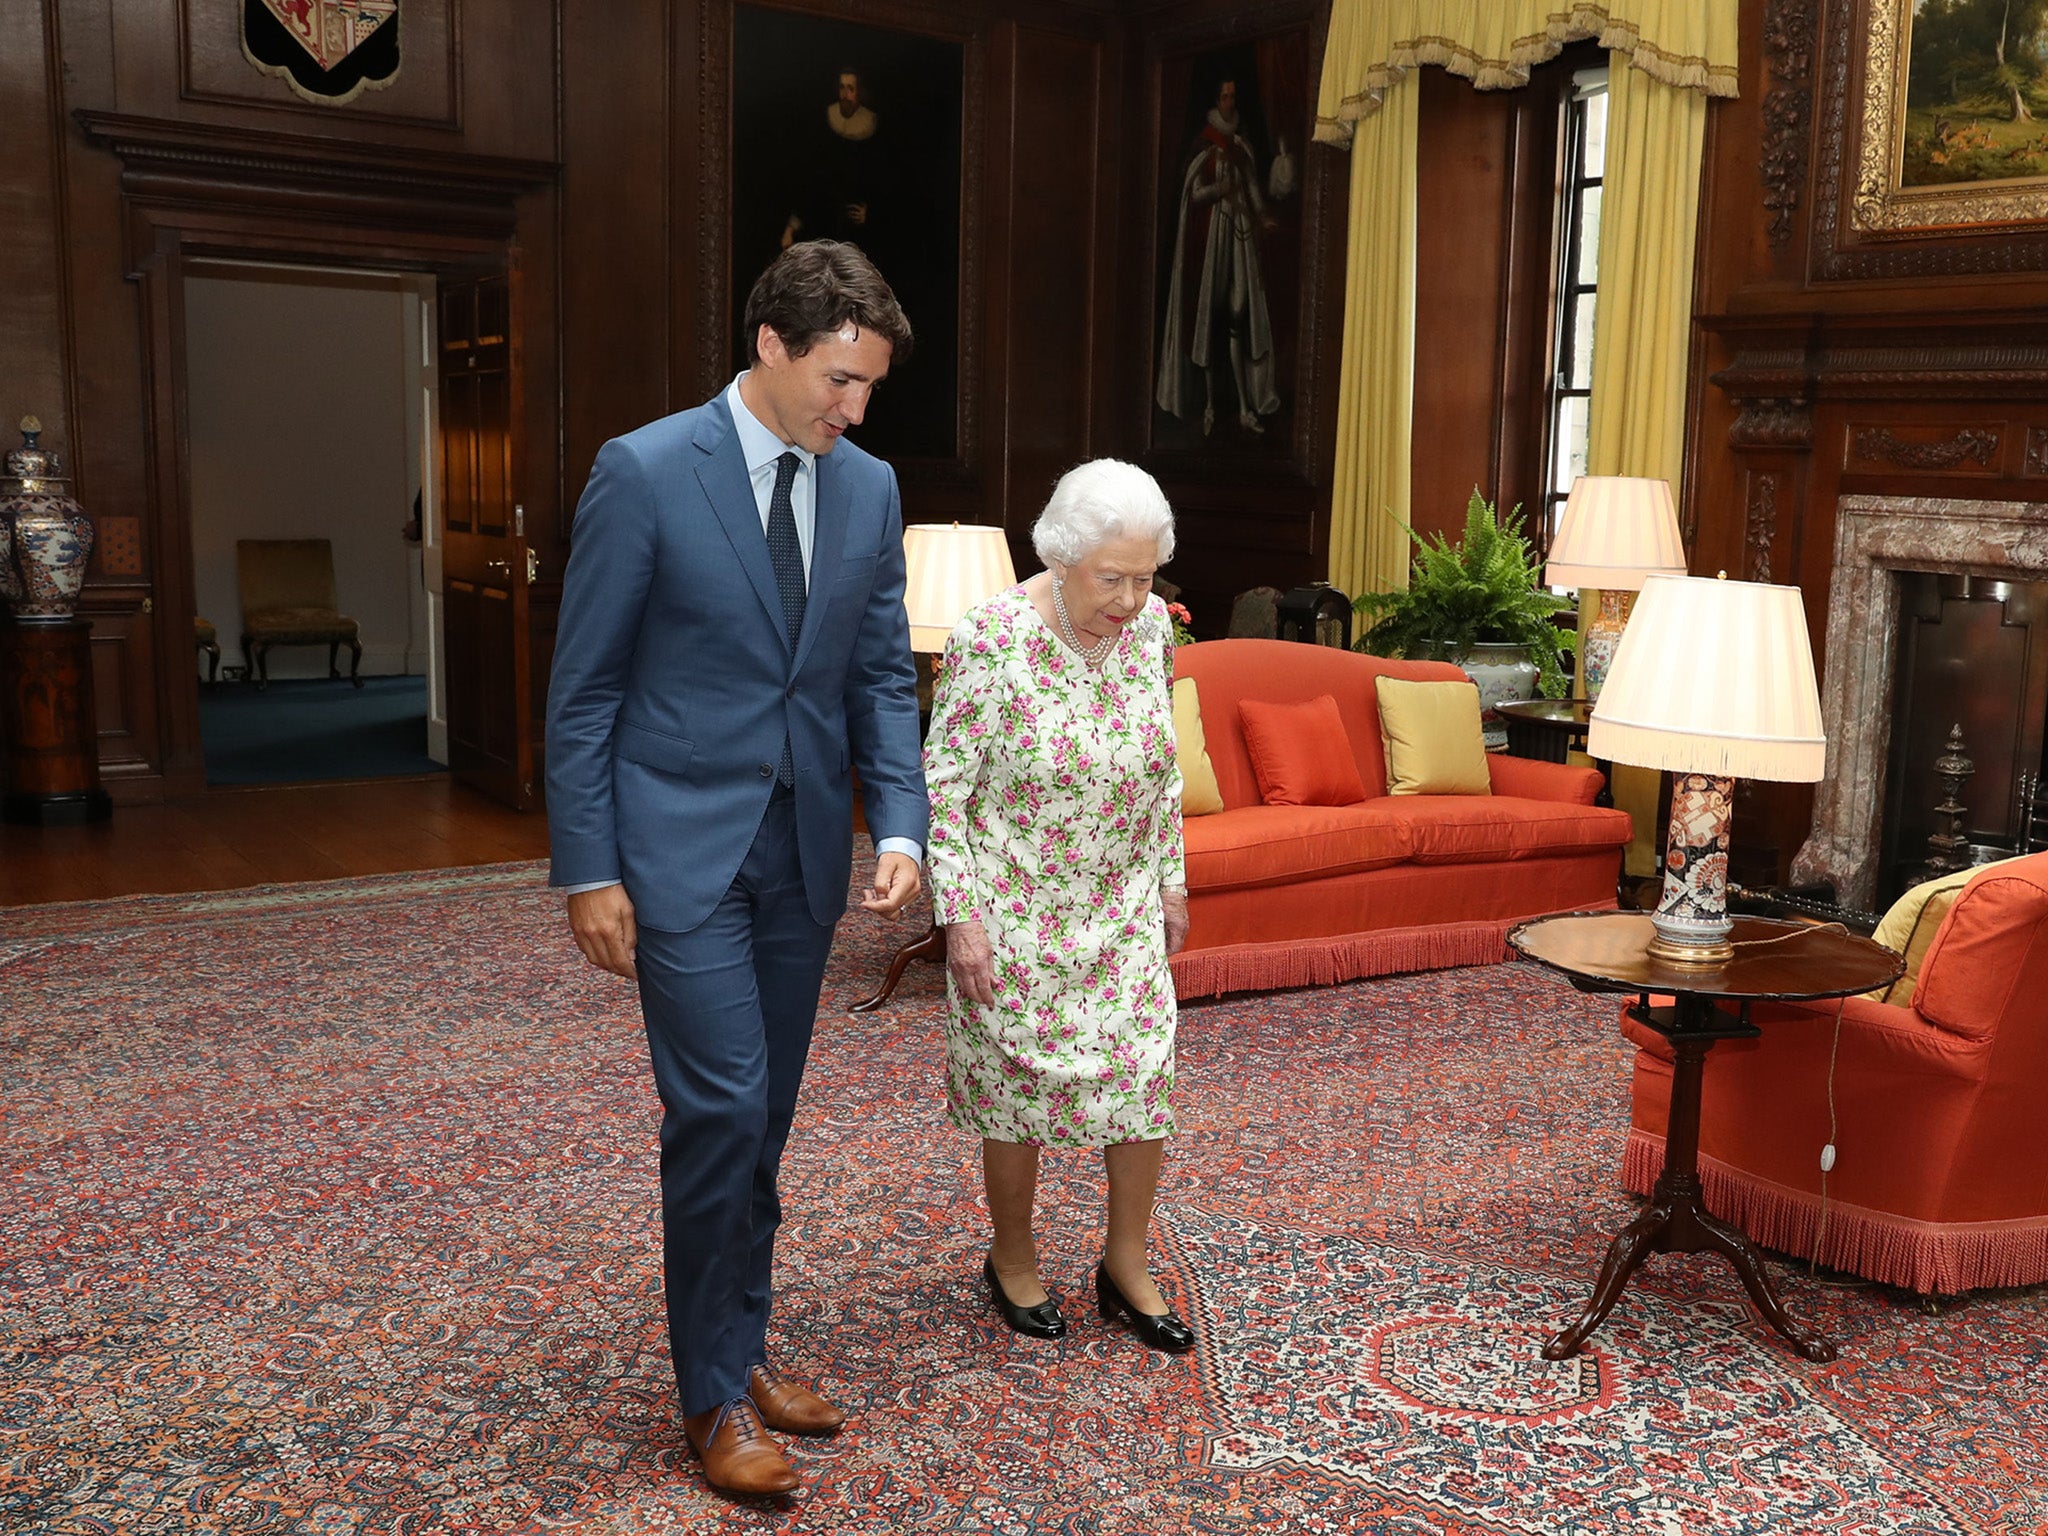 The Canadian Prime Minister met with the Queen in Edinburgh on Wednesday – and hopefully delivered some economic advice